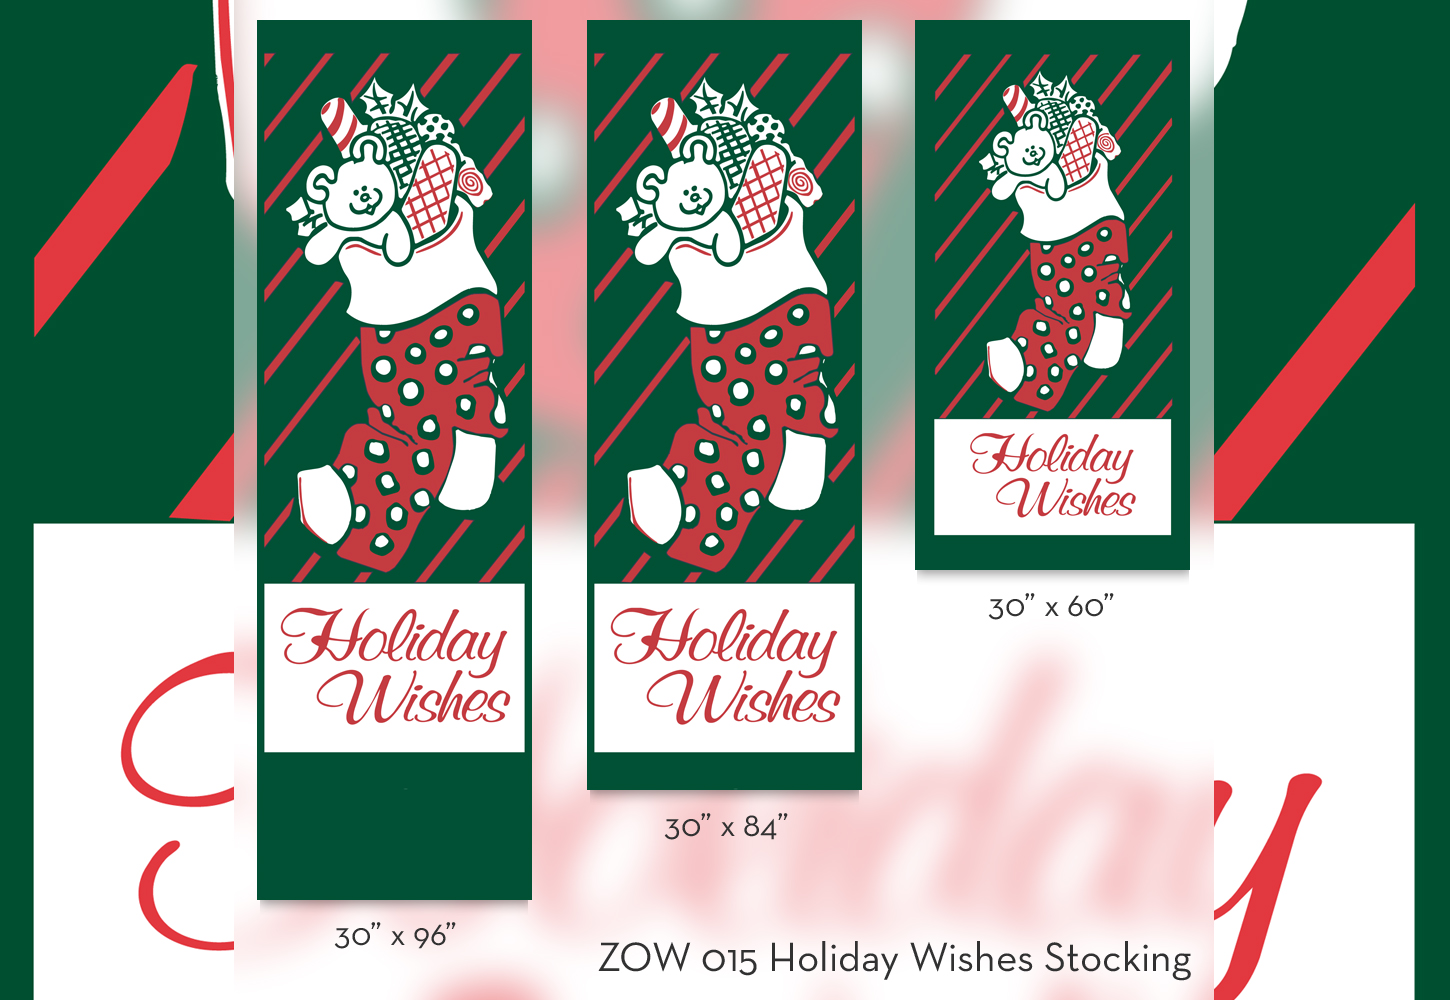 ZOW 015 Holiday Wishes Stocking